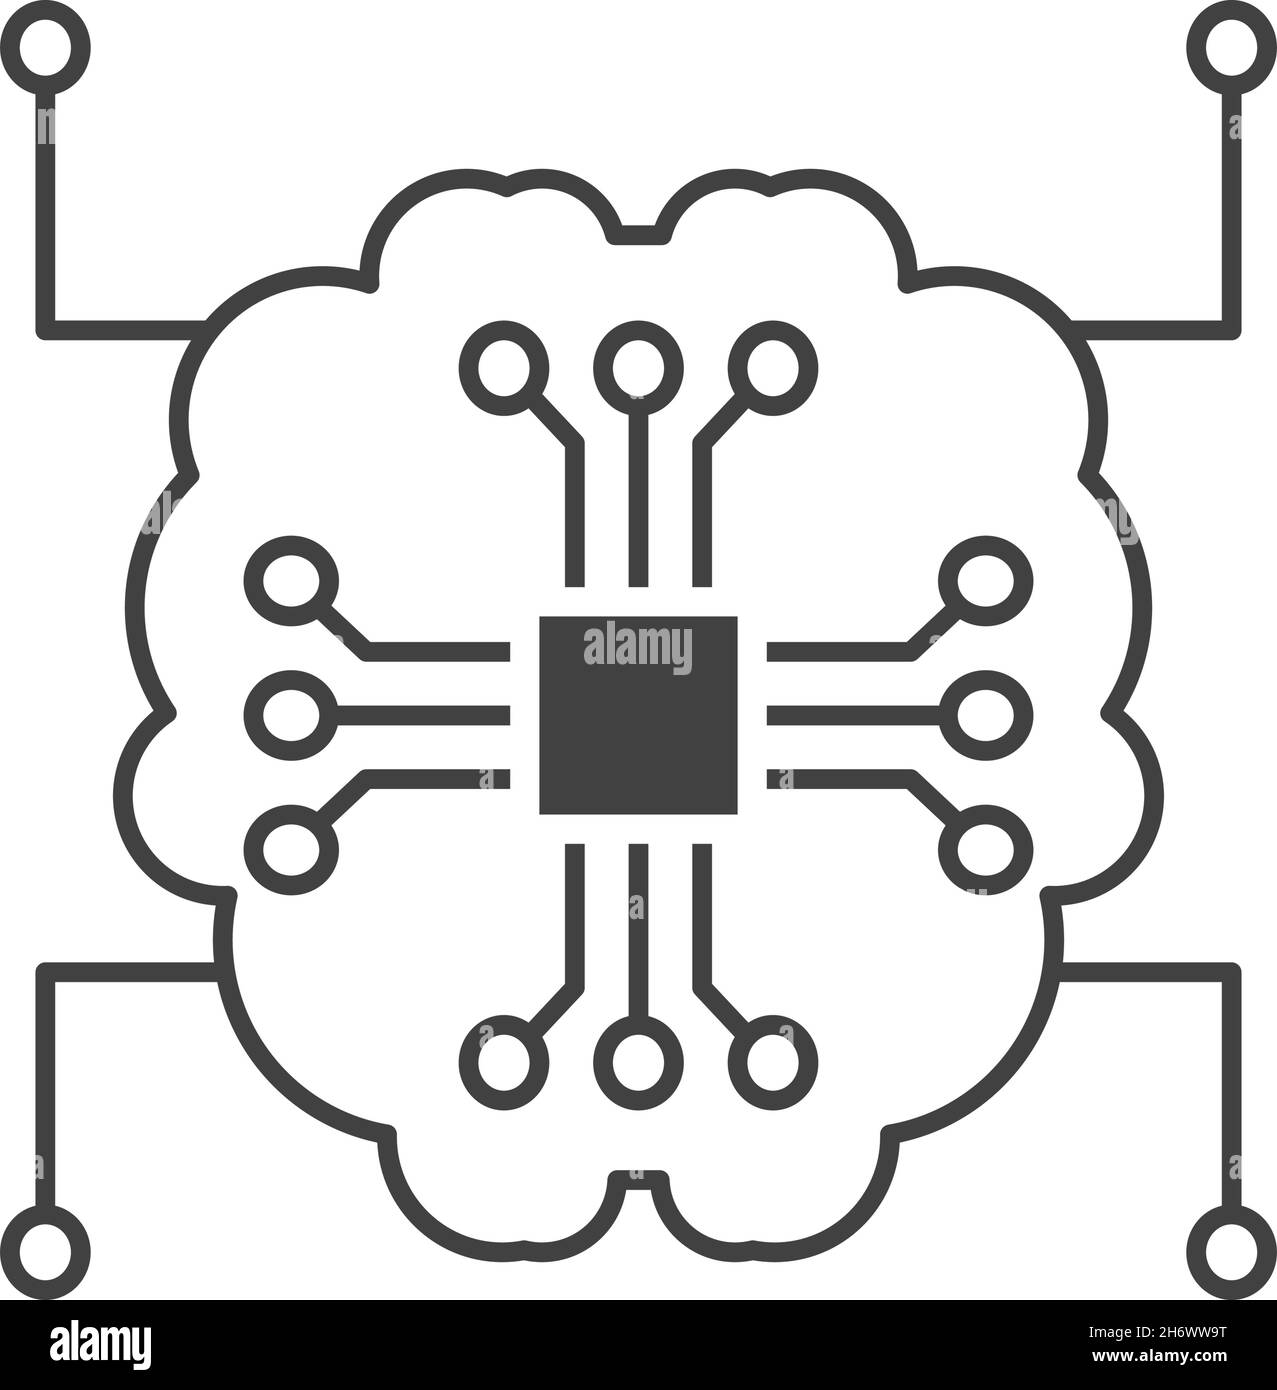 Human brain connected with a computer CPU chip circuit. AI or Artificial Intelligence concept. Outline thin line icon. Isolated. Stock Vector